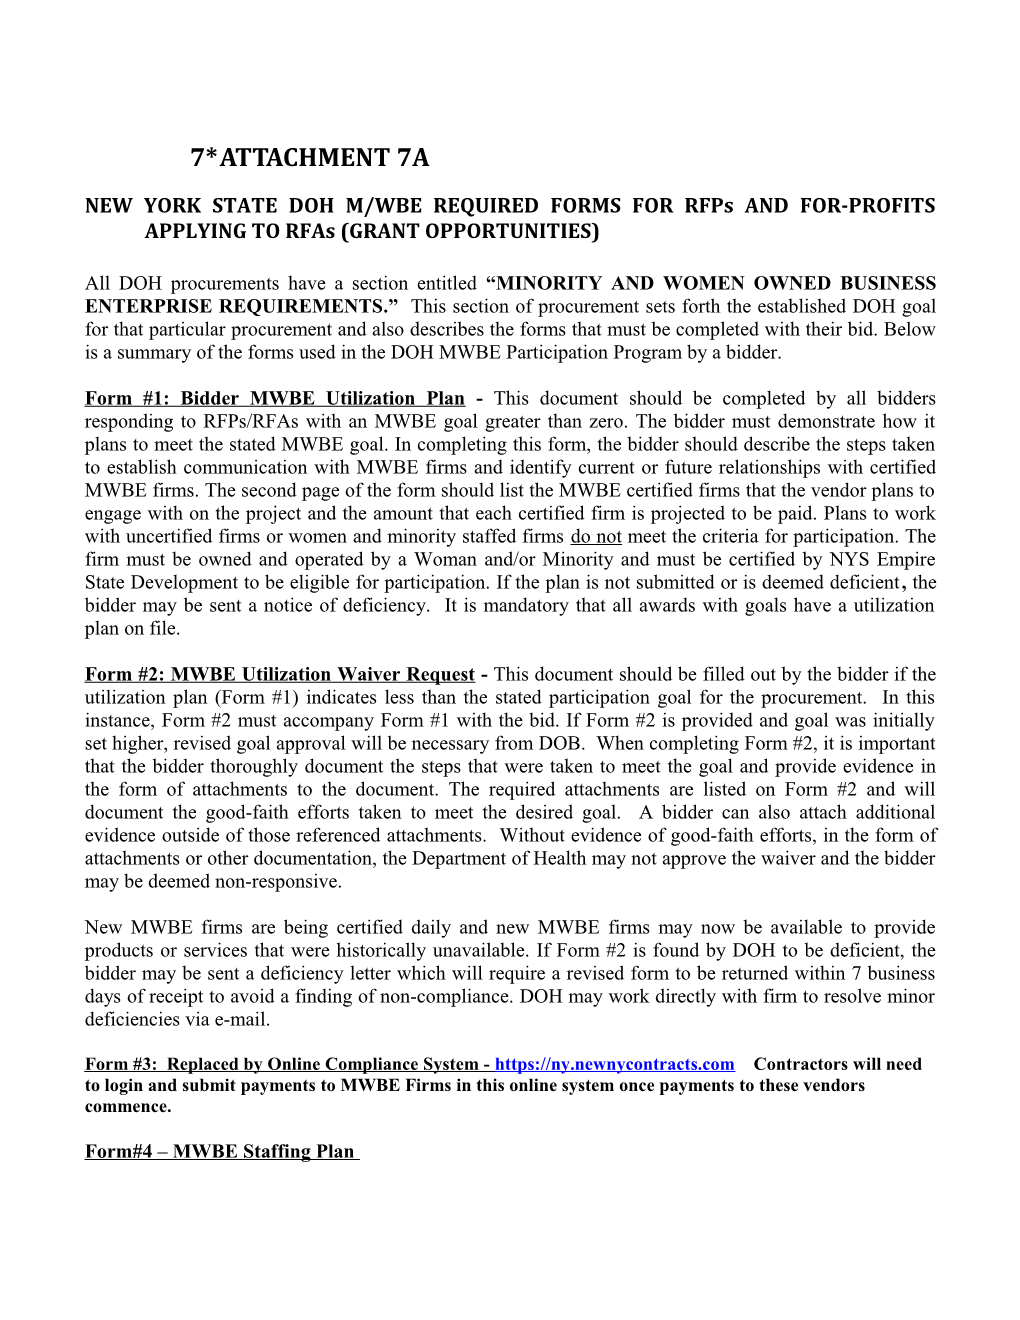 NEW YORK STATE DOH M/WBE REQUIRED FORMS for Rfps and FOR-PROFITS APPLYING to Rfas (GRANT